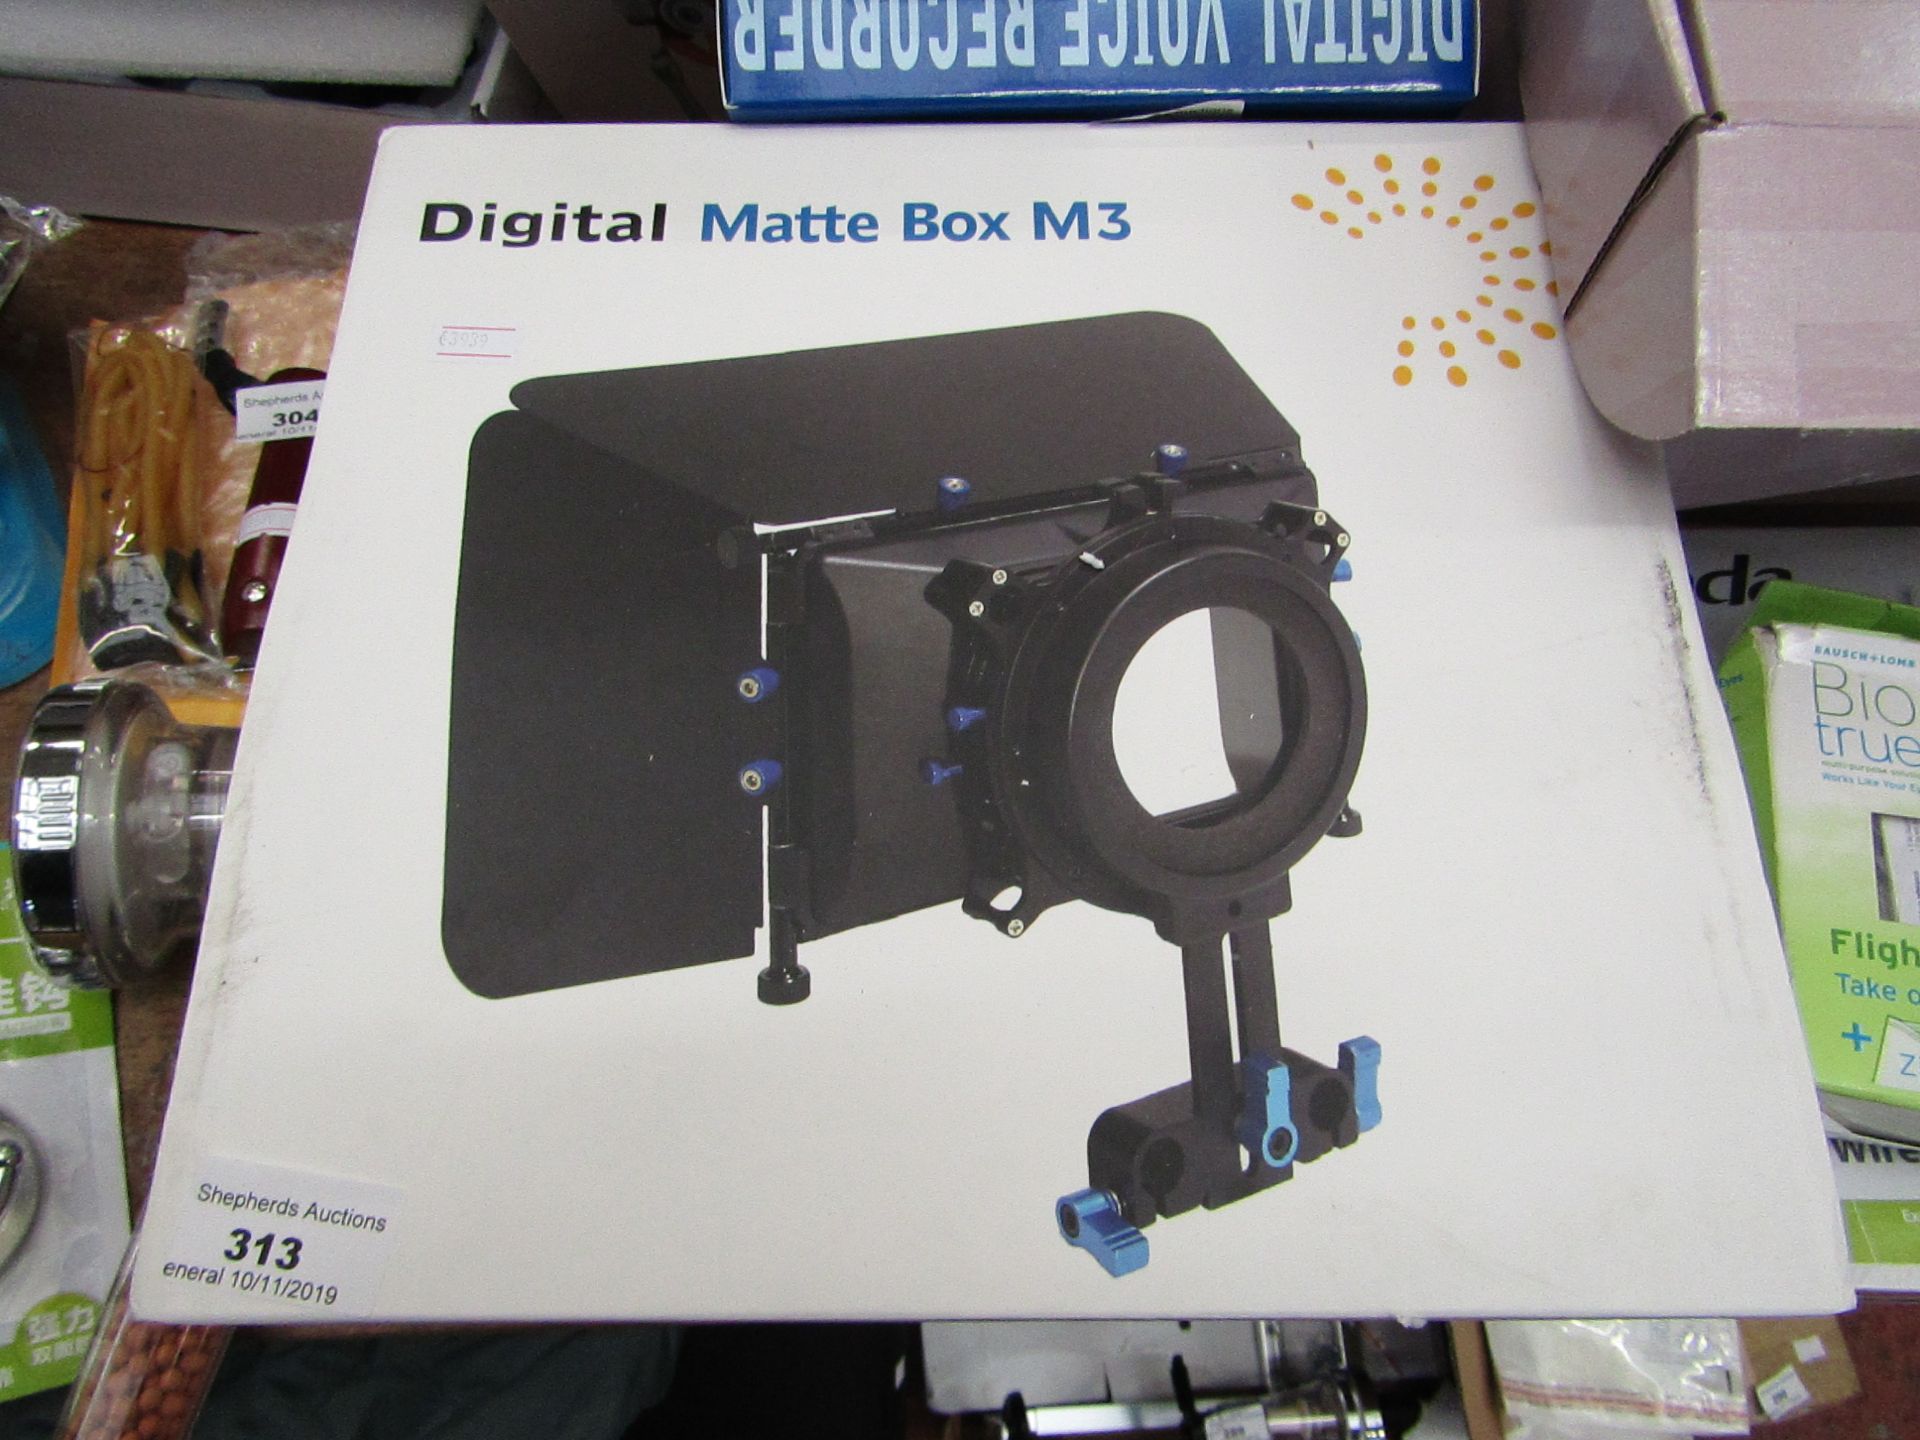 Digital Matte Box M3. Boxed but unchecked